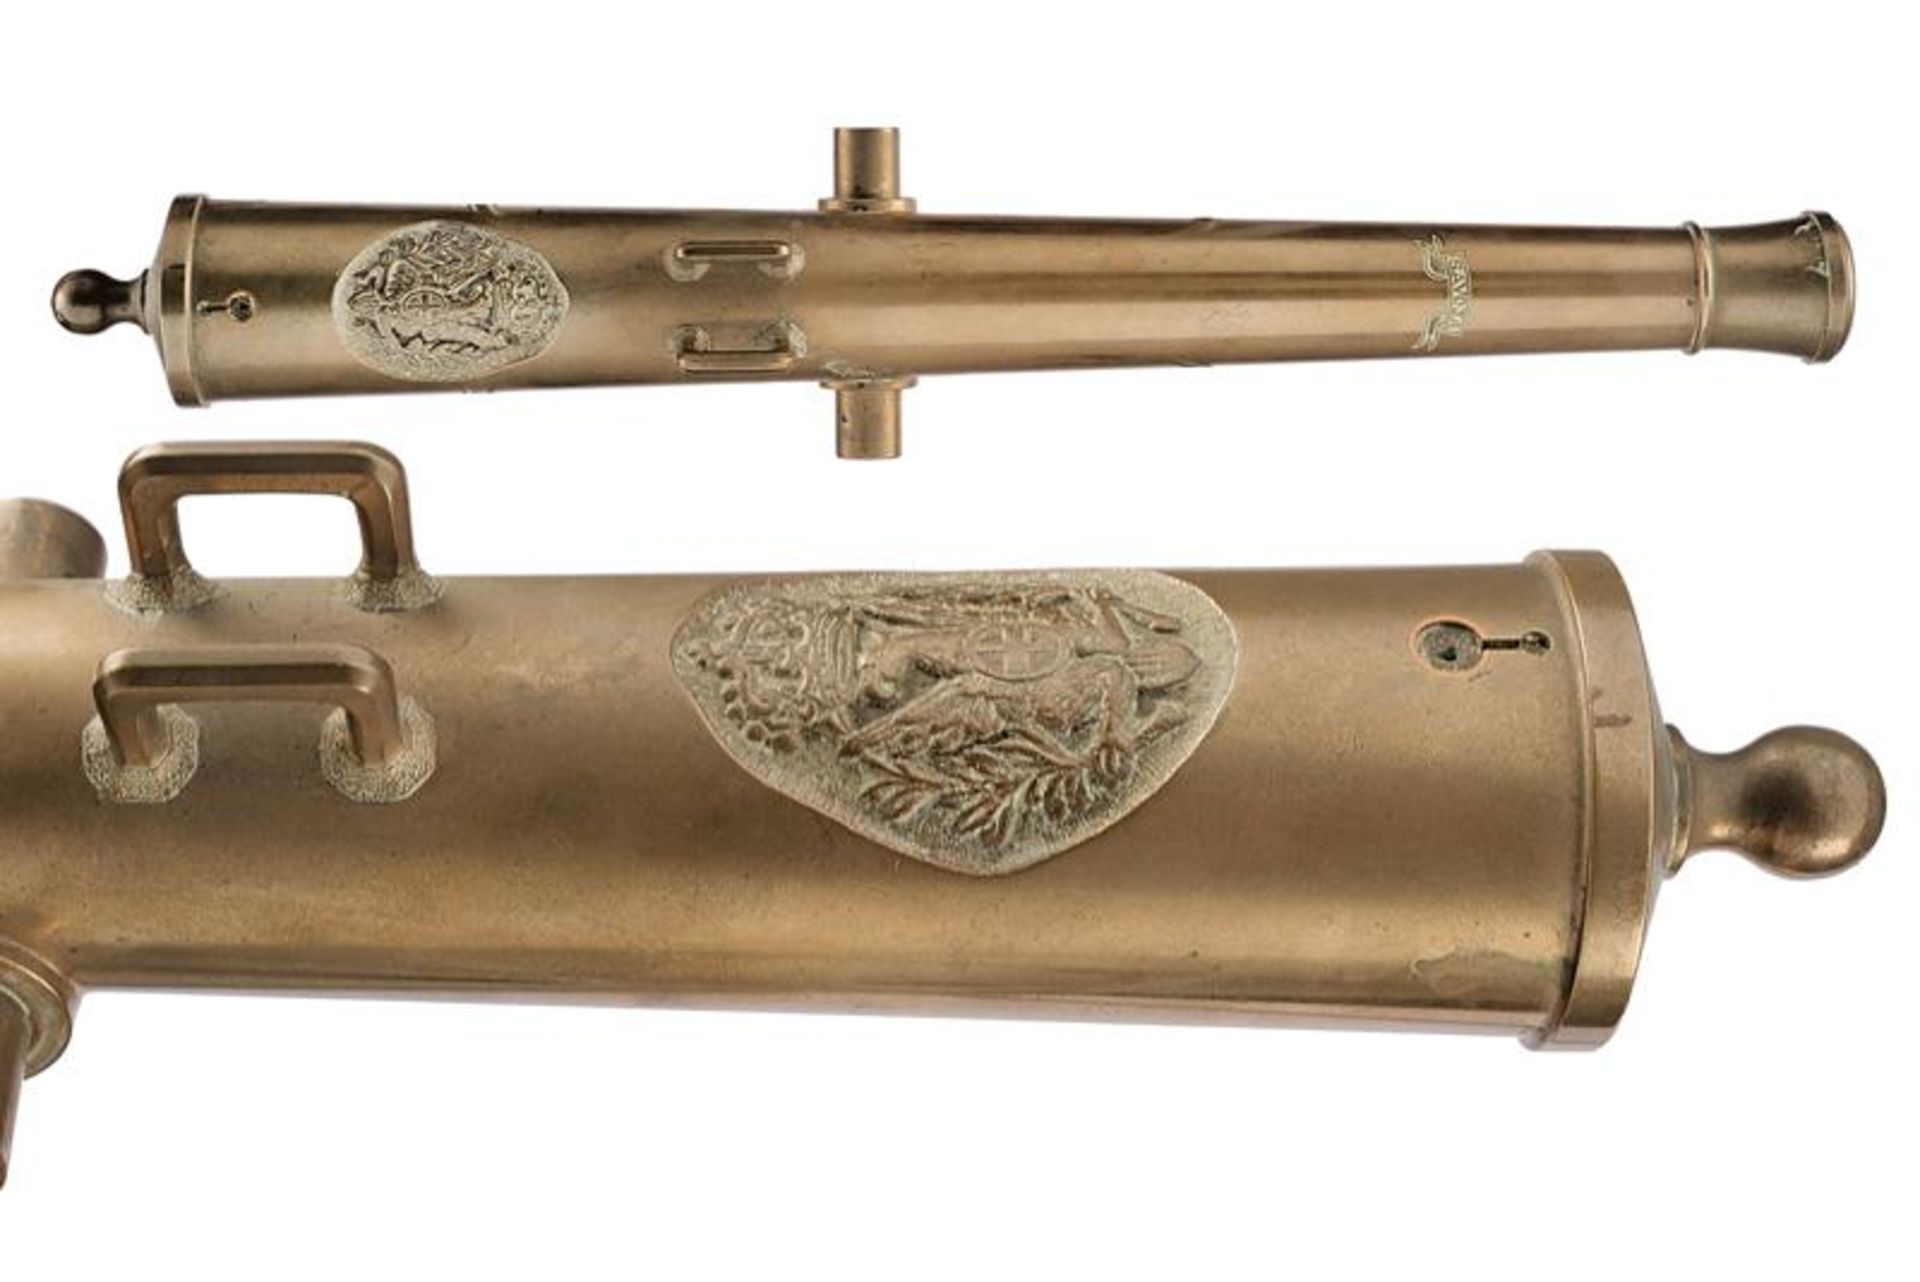 A cannon model with Savoy coat-of-arms